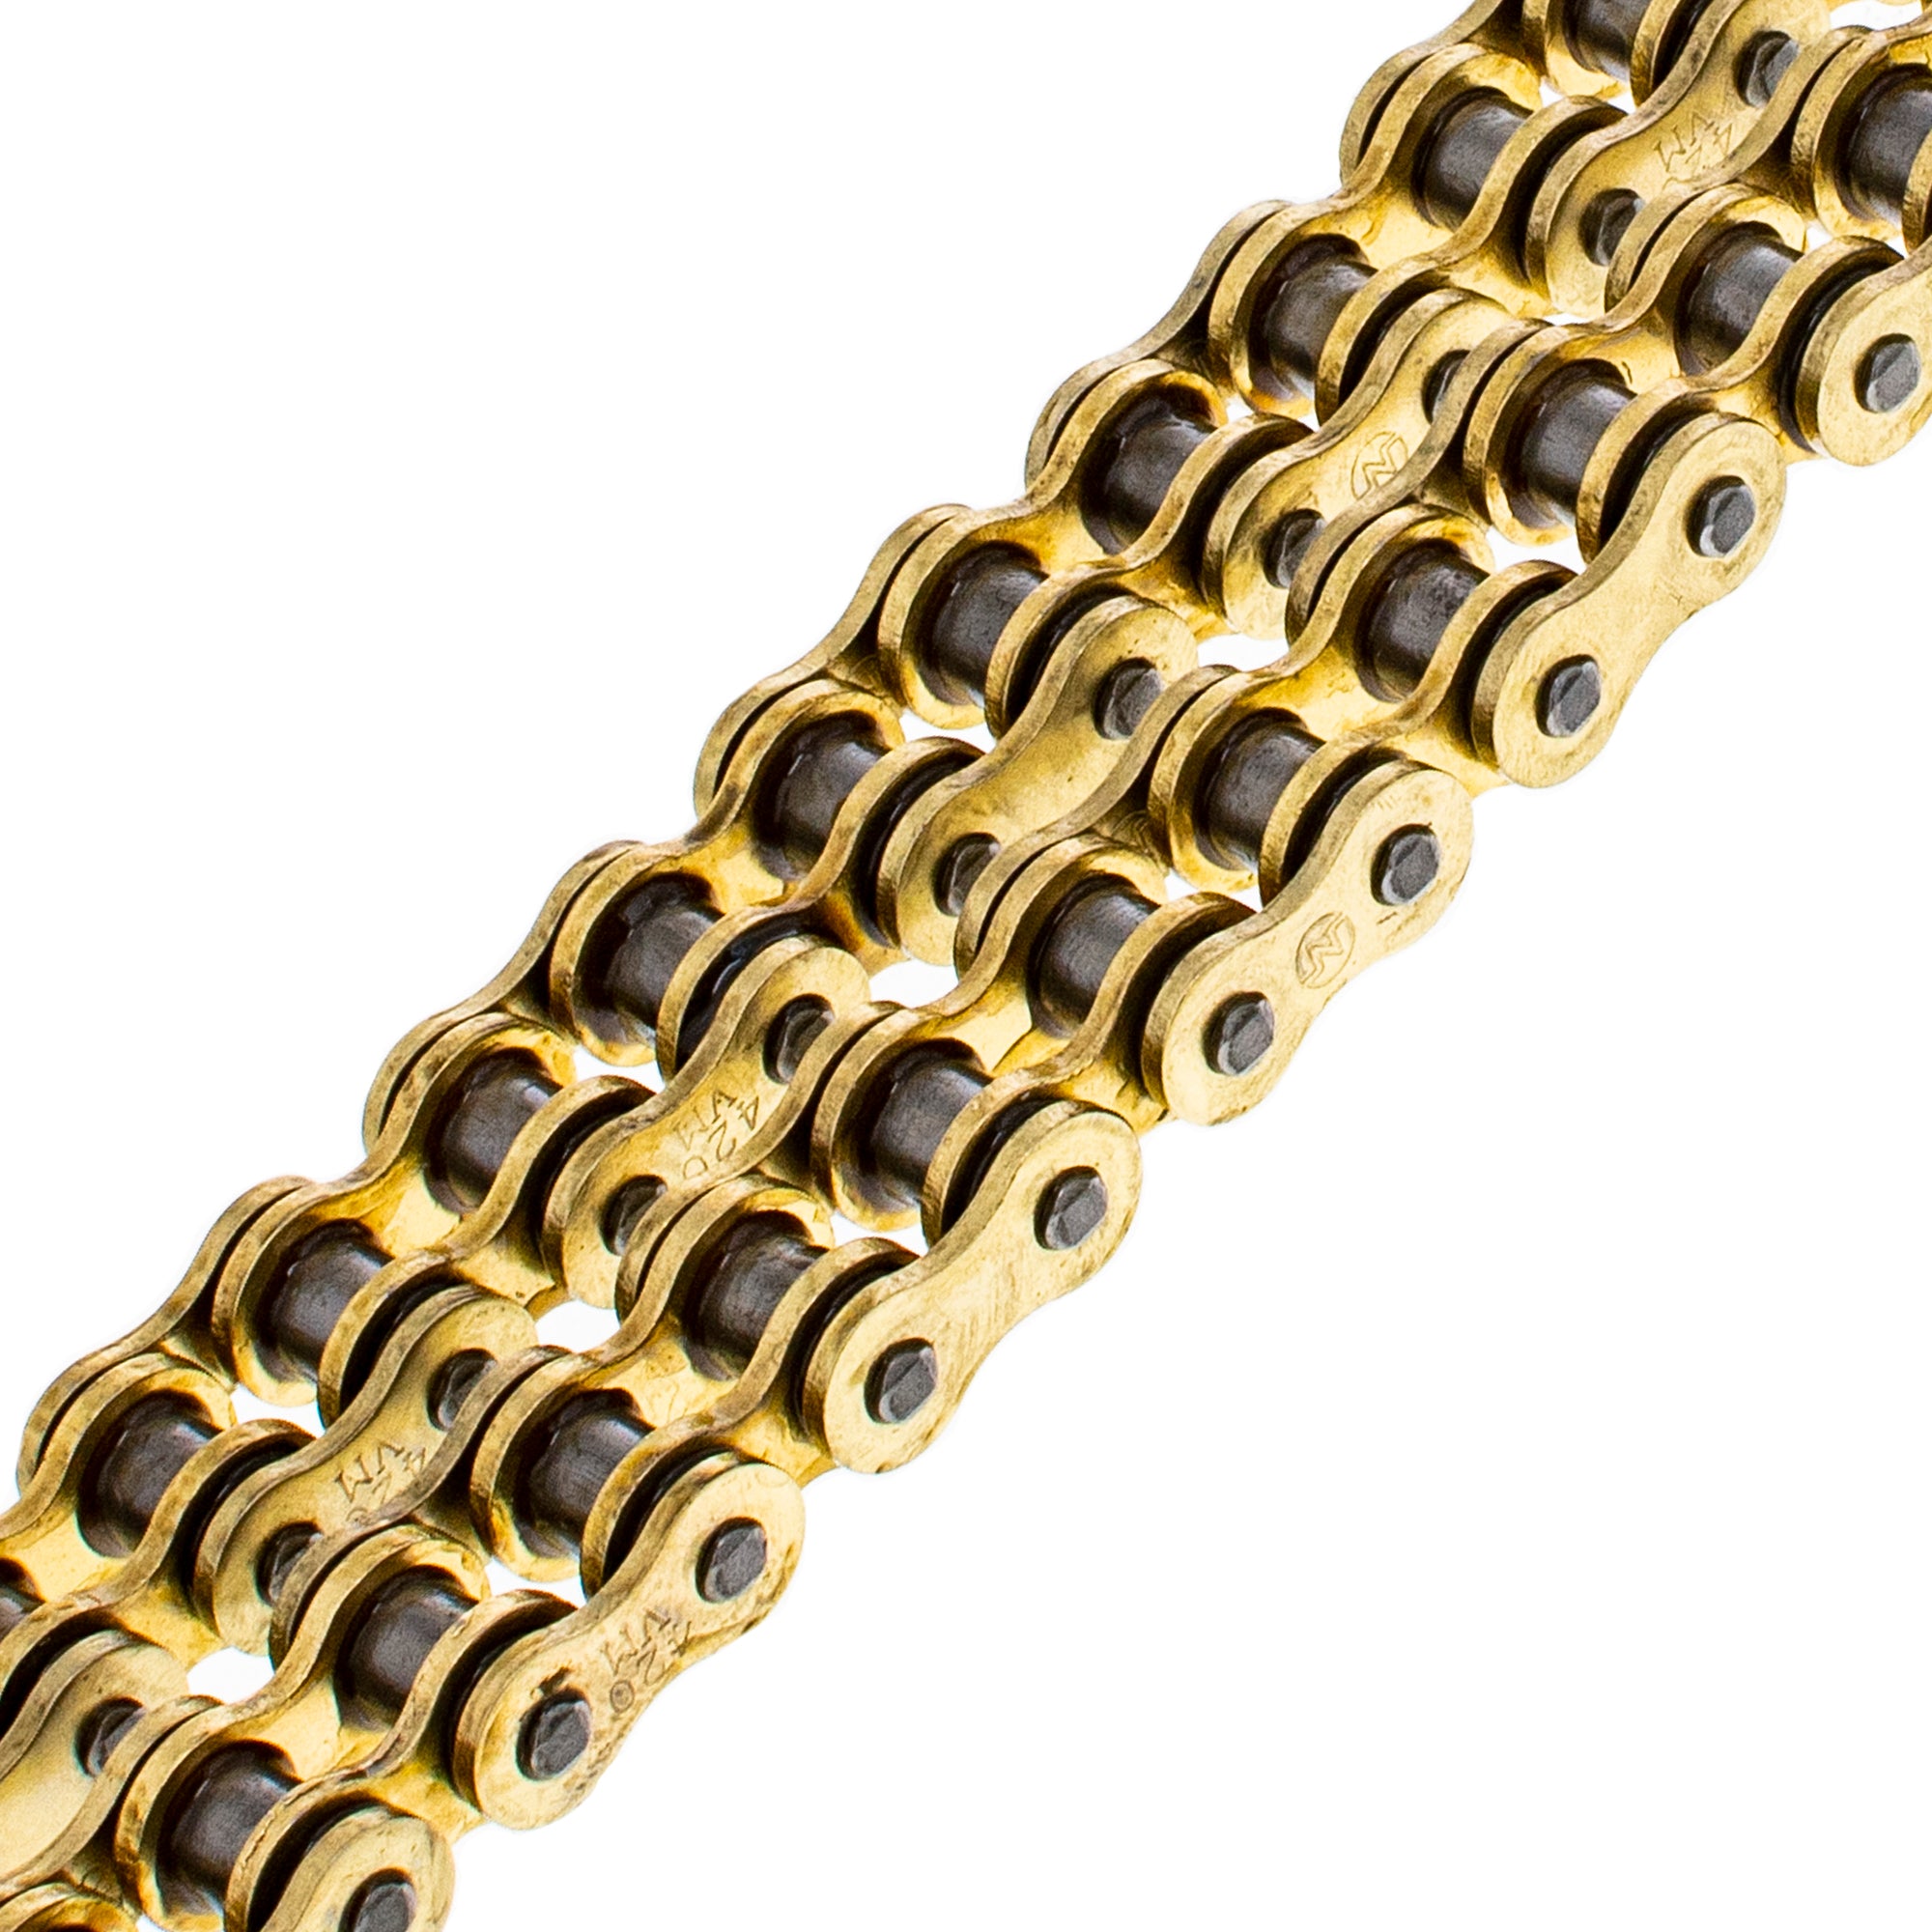 Gold X-Ring Chain 92 w/ Master Link for zOTHER XL80S XL75 XL70 Trail 94513-09200-00 NICHE 519-CDC2505H